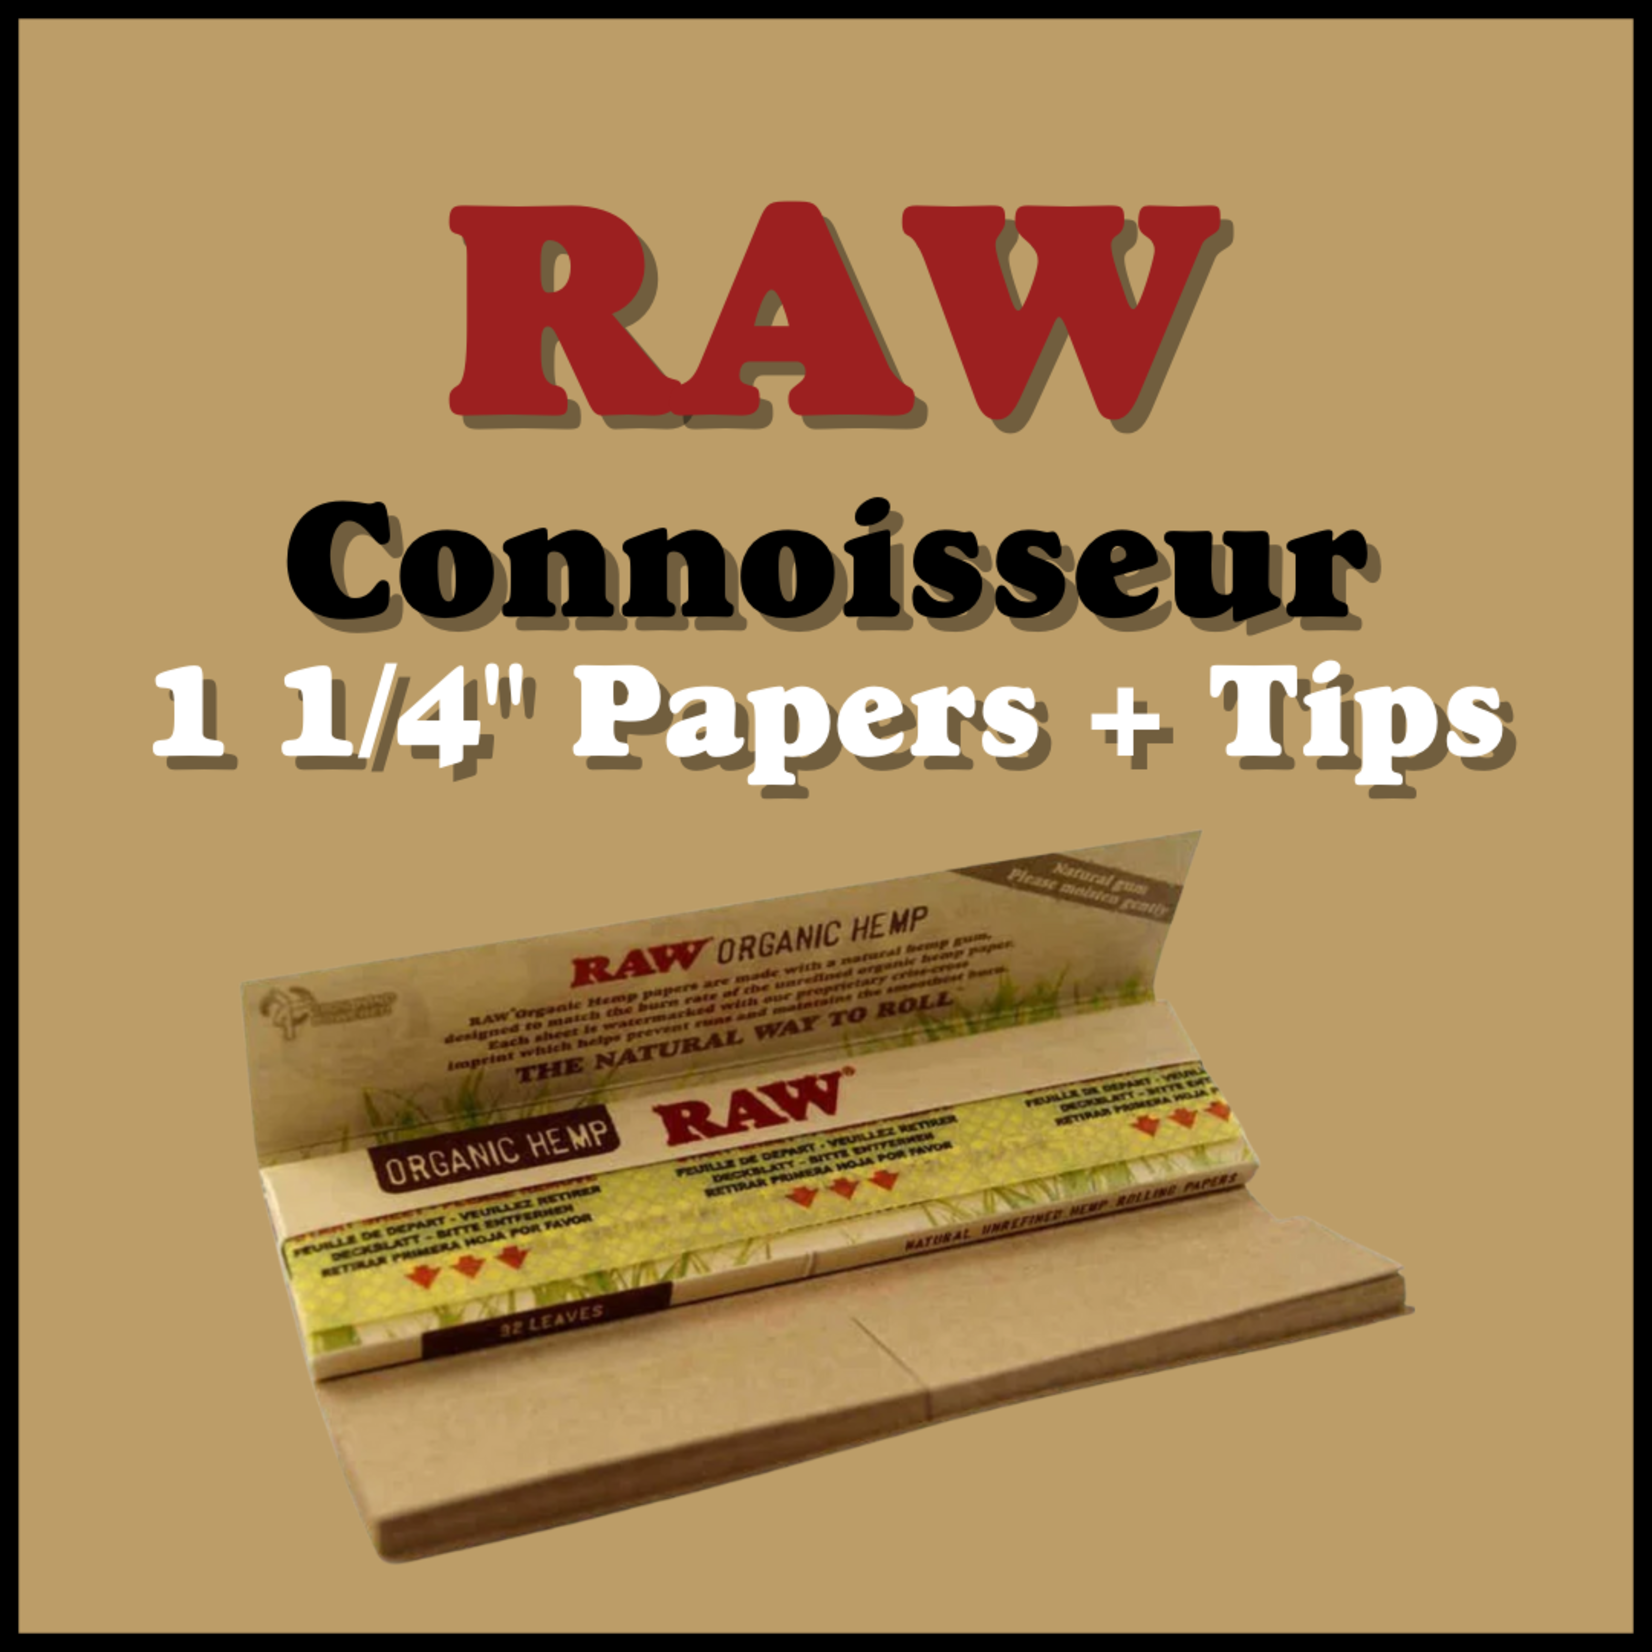 RAW RAW Connoisseur: Organic 1 1/4" Rolling Papers + Tips